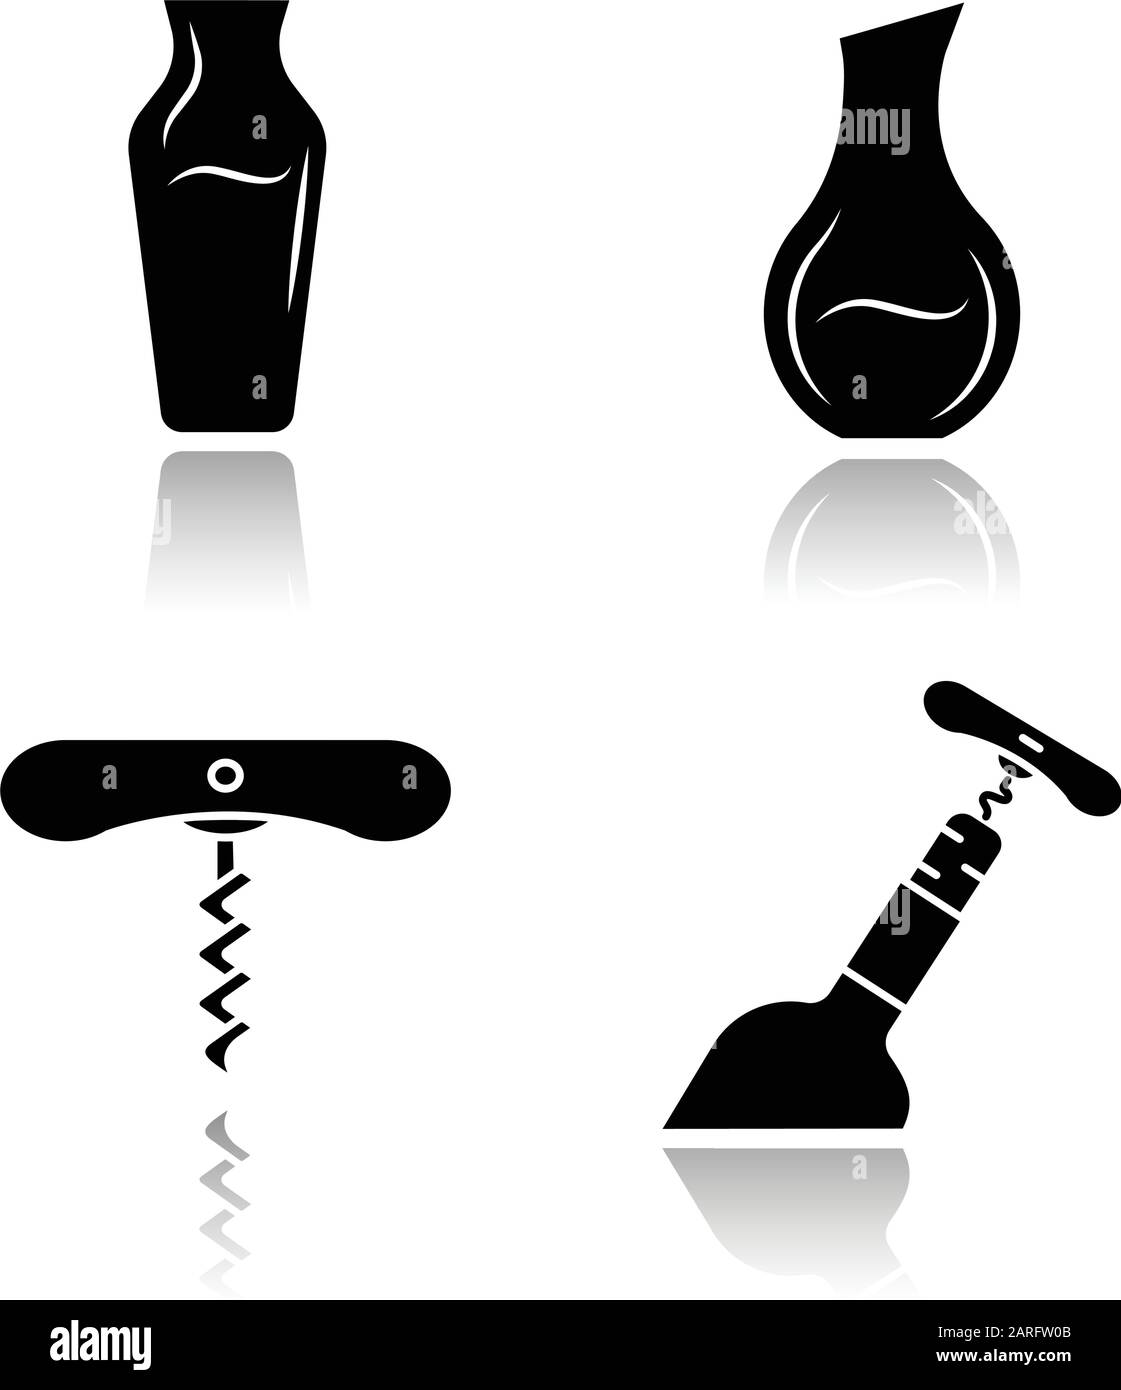 Wine drop shadow black glyph icons set. Different types of decanters. Corkscrew, bottle opening tools. Barman equipment. Alcohol beverage, aperitif dr Stock Vector